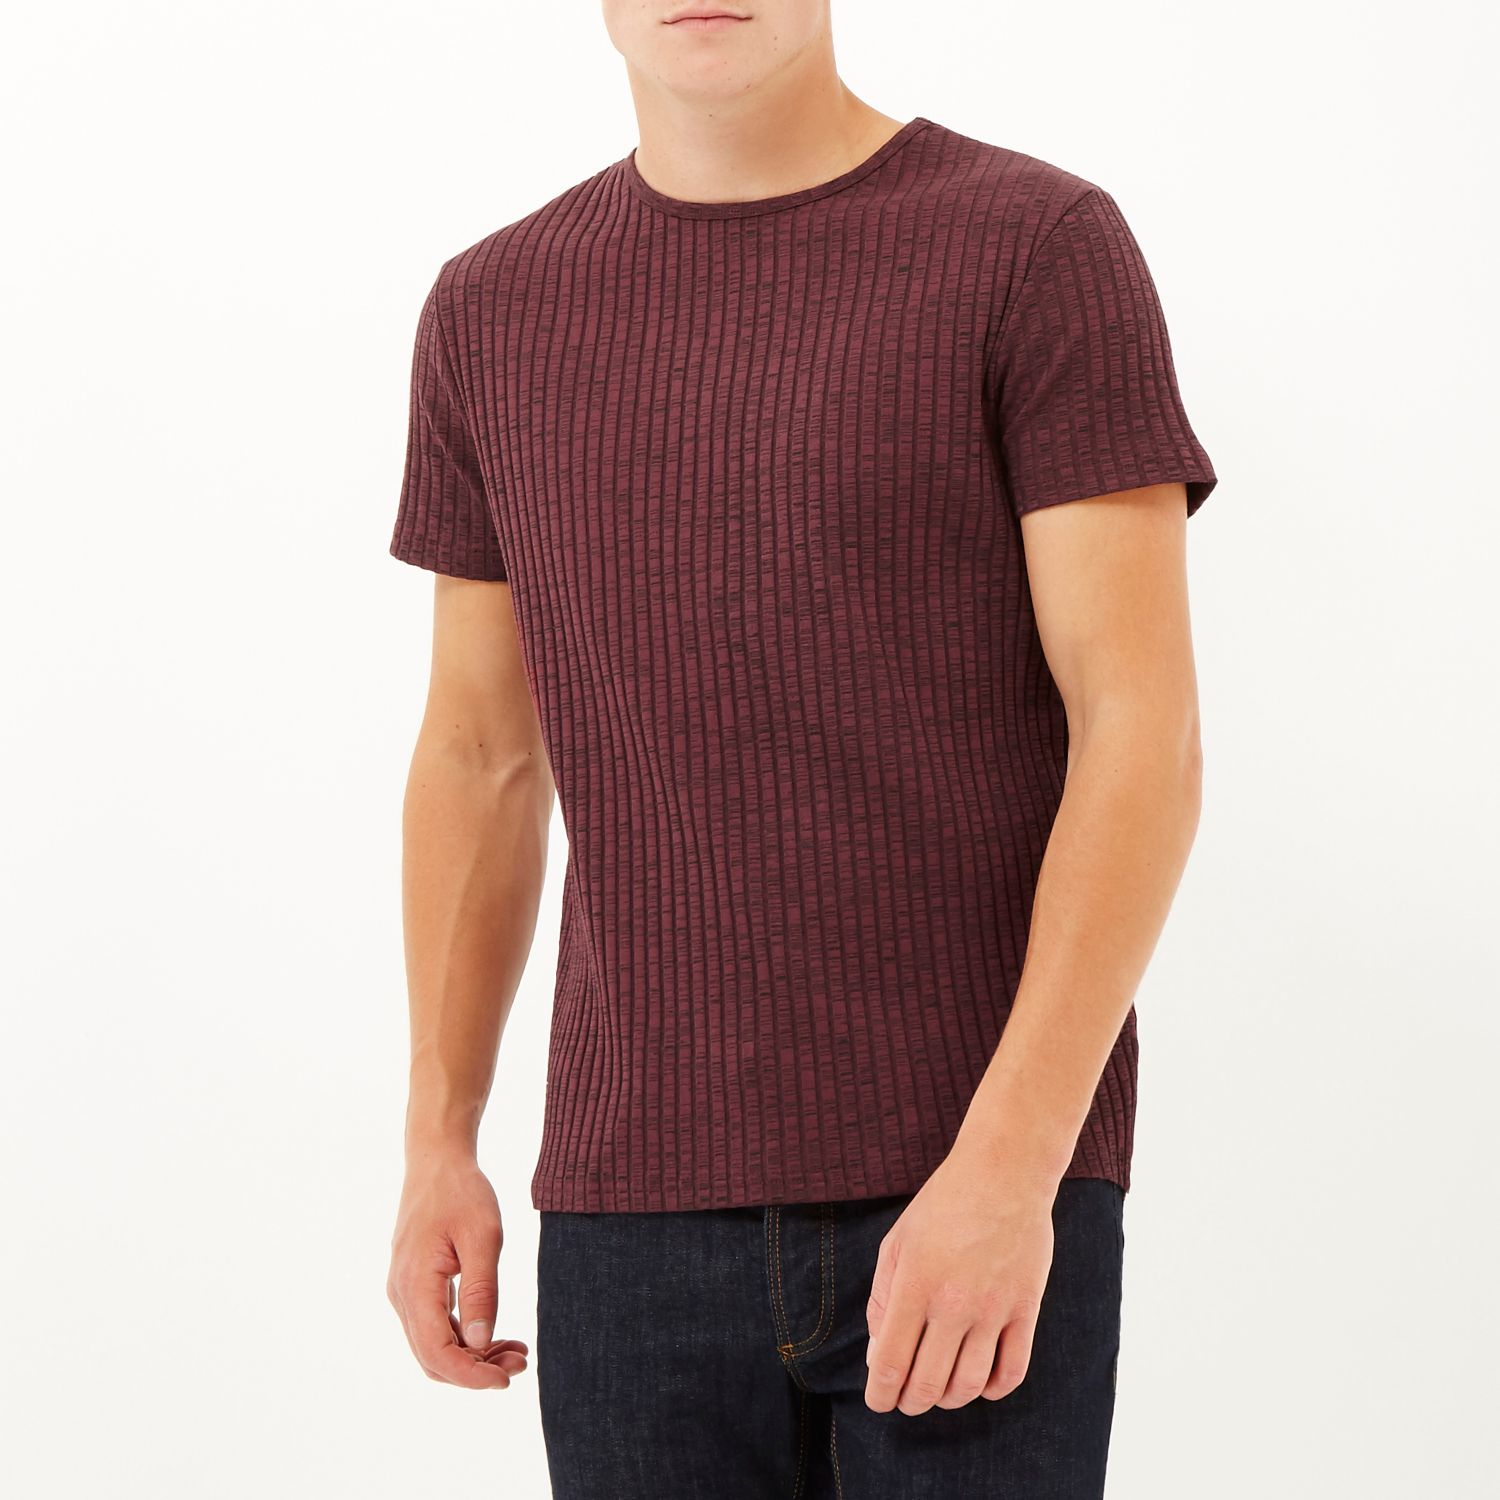 Lyst - River Island Dark Red Ribbed Short Sleeve T-shirt in Red for Men